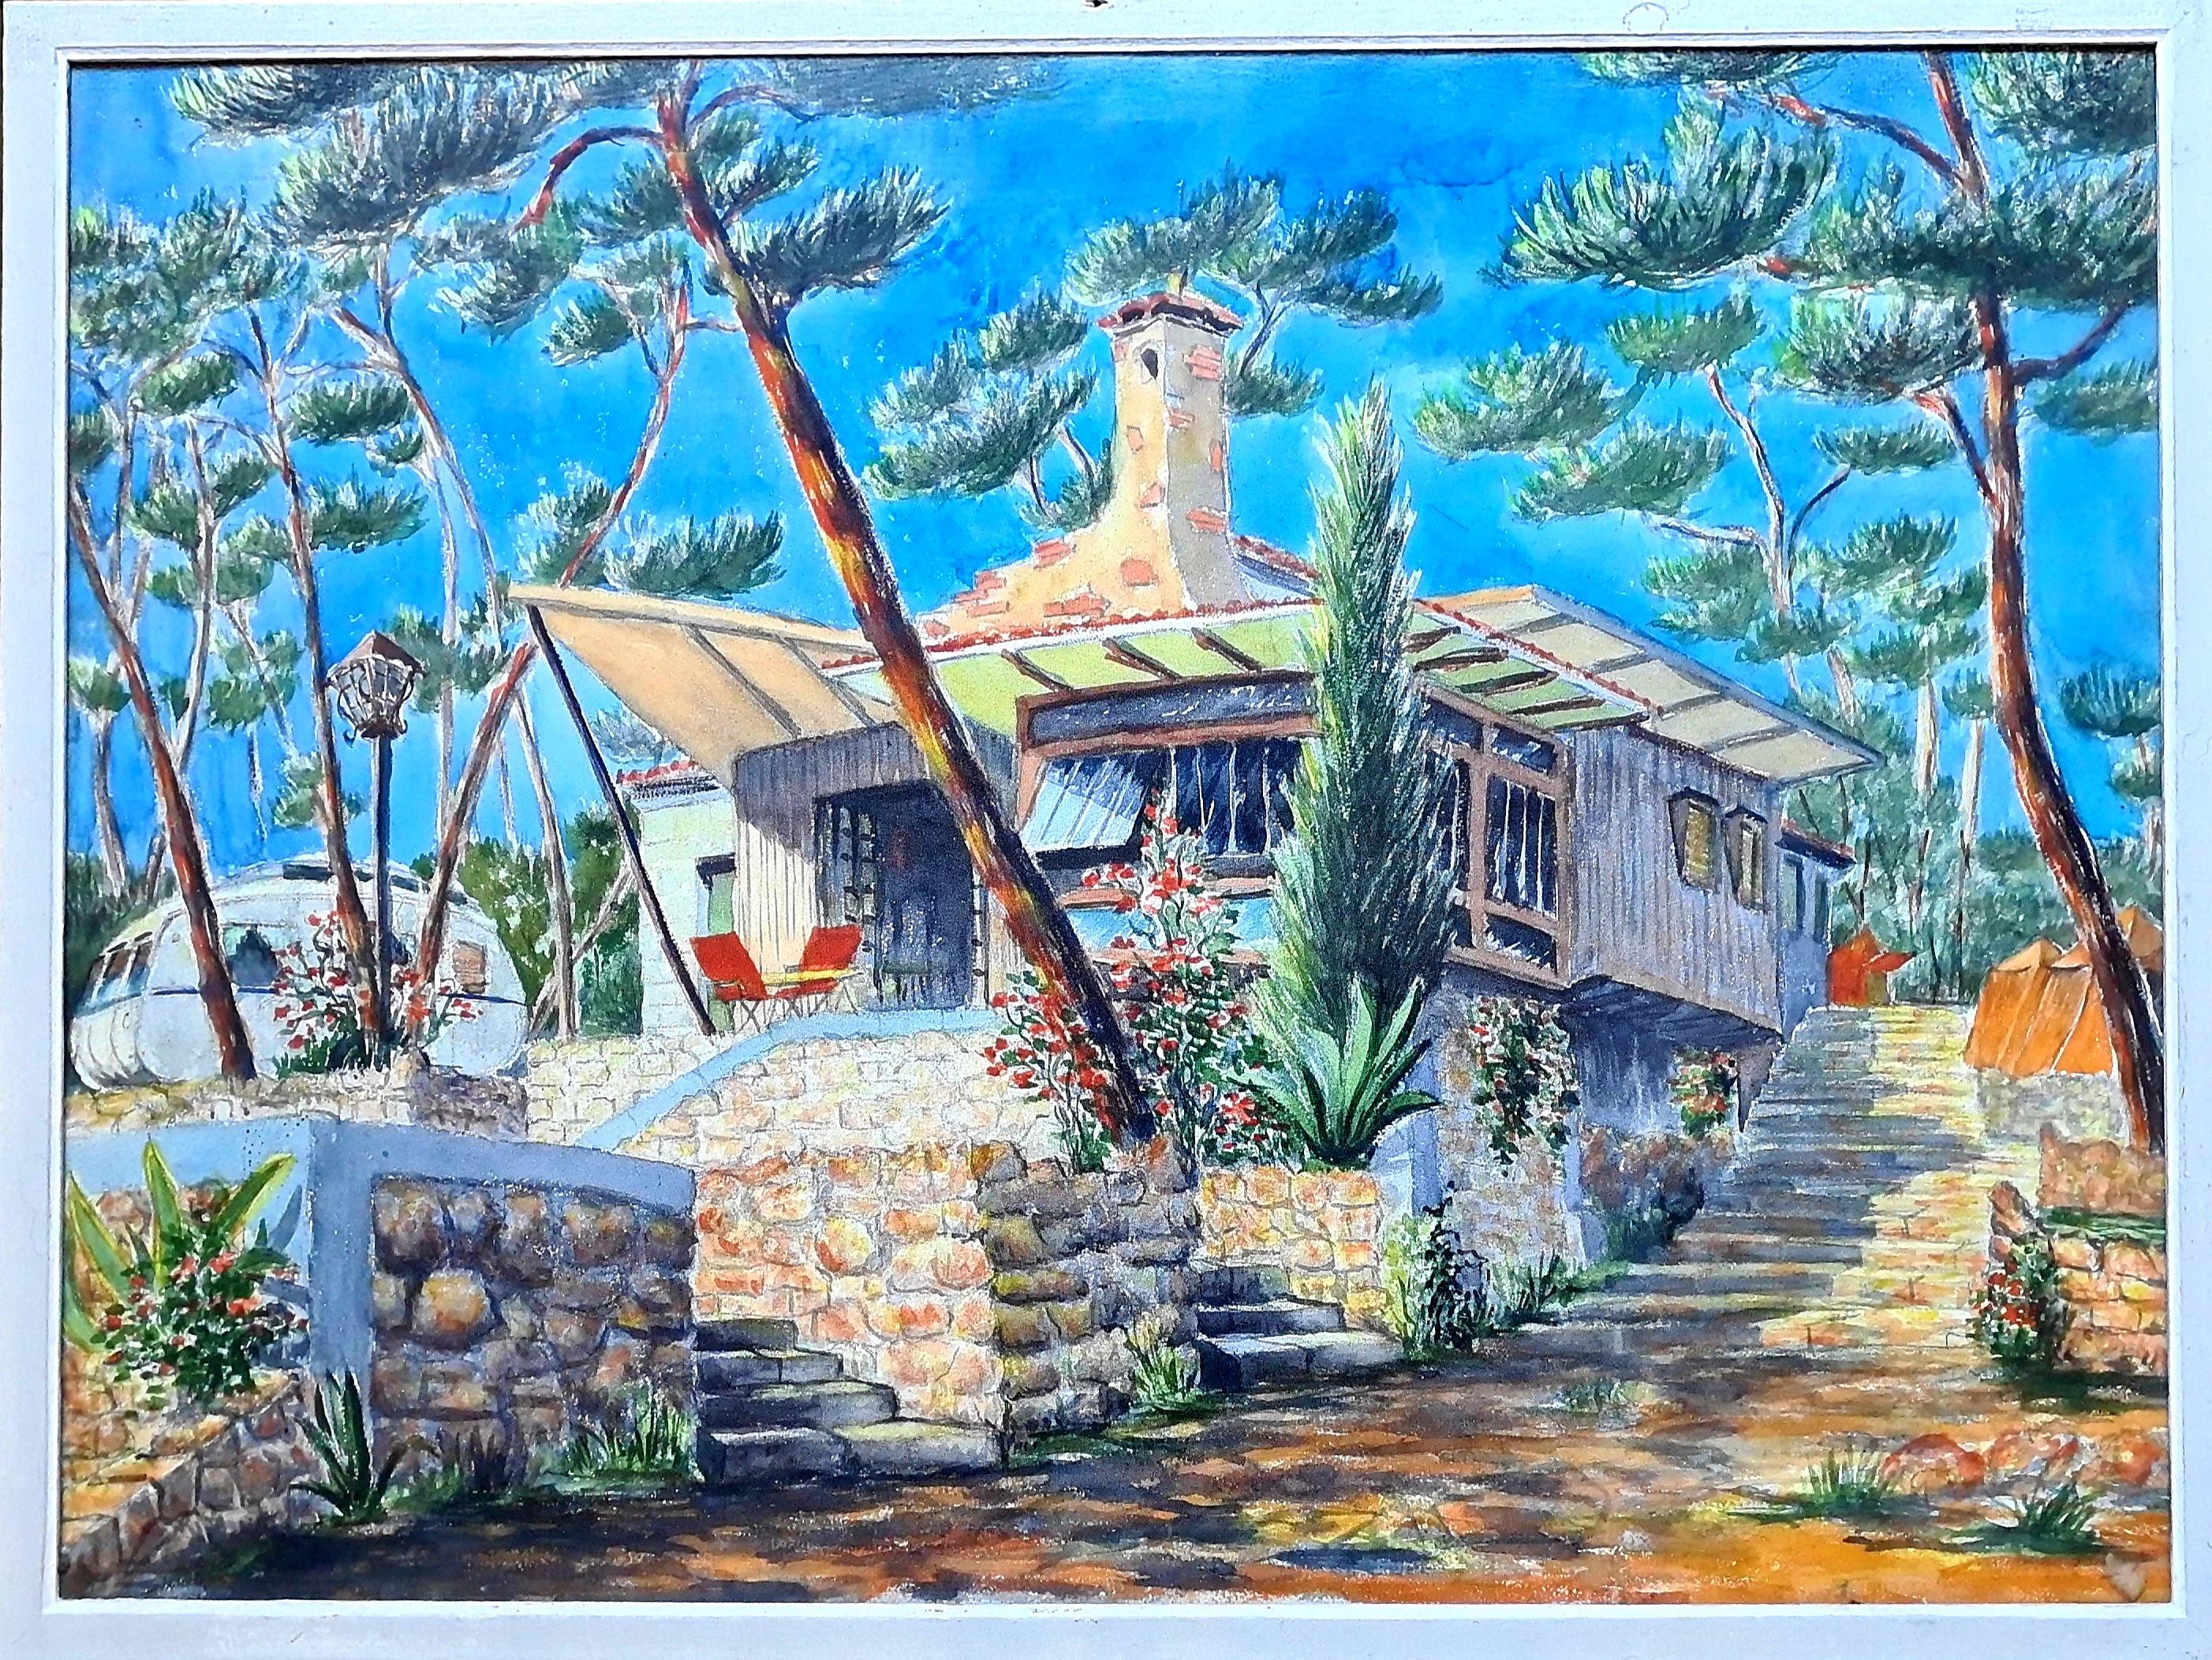  R Tord Landscape Art - Large Scale Architect's Drawing of a French Mid Century Villa and Garden